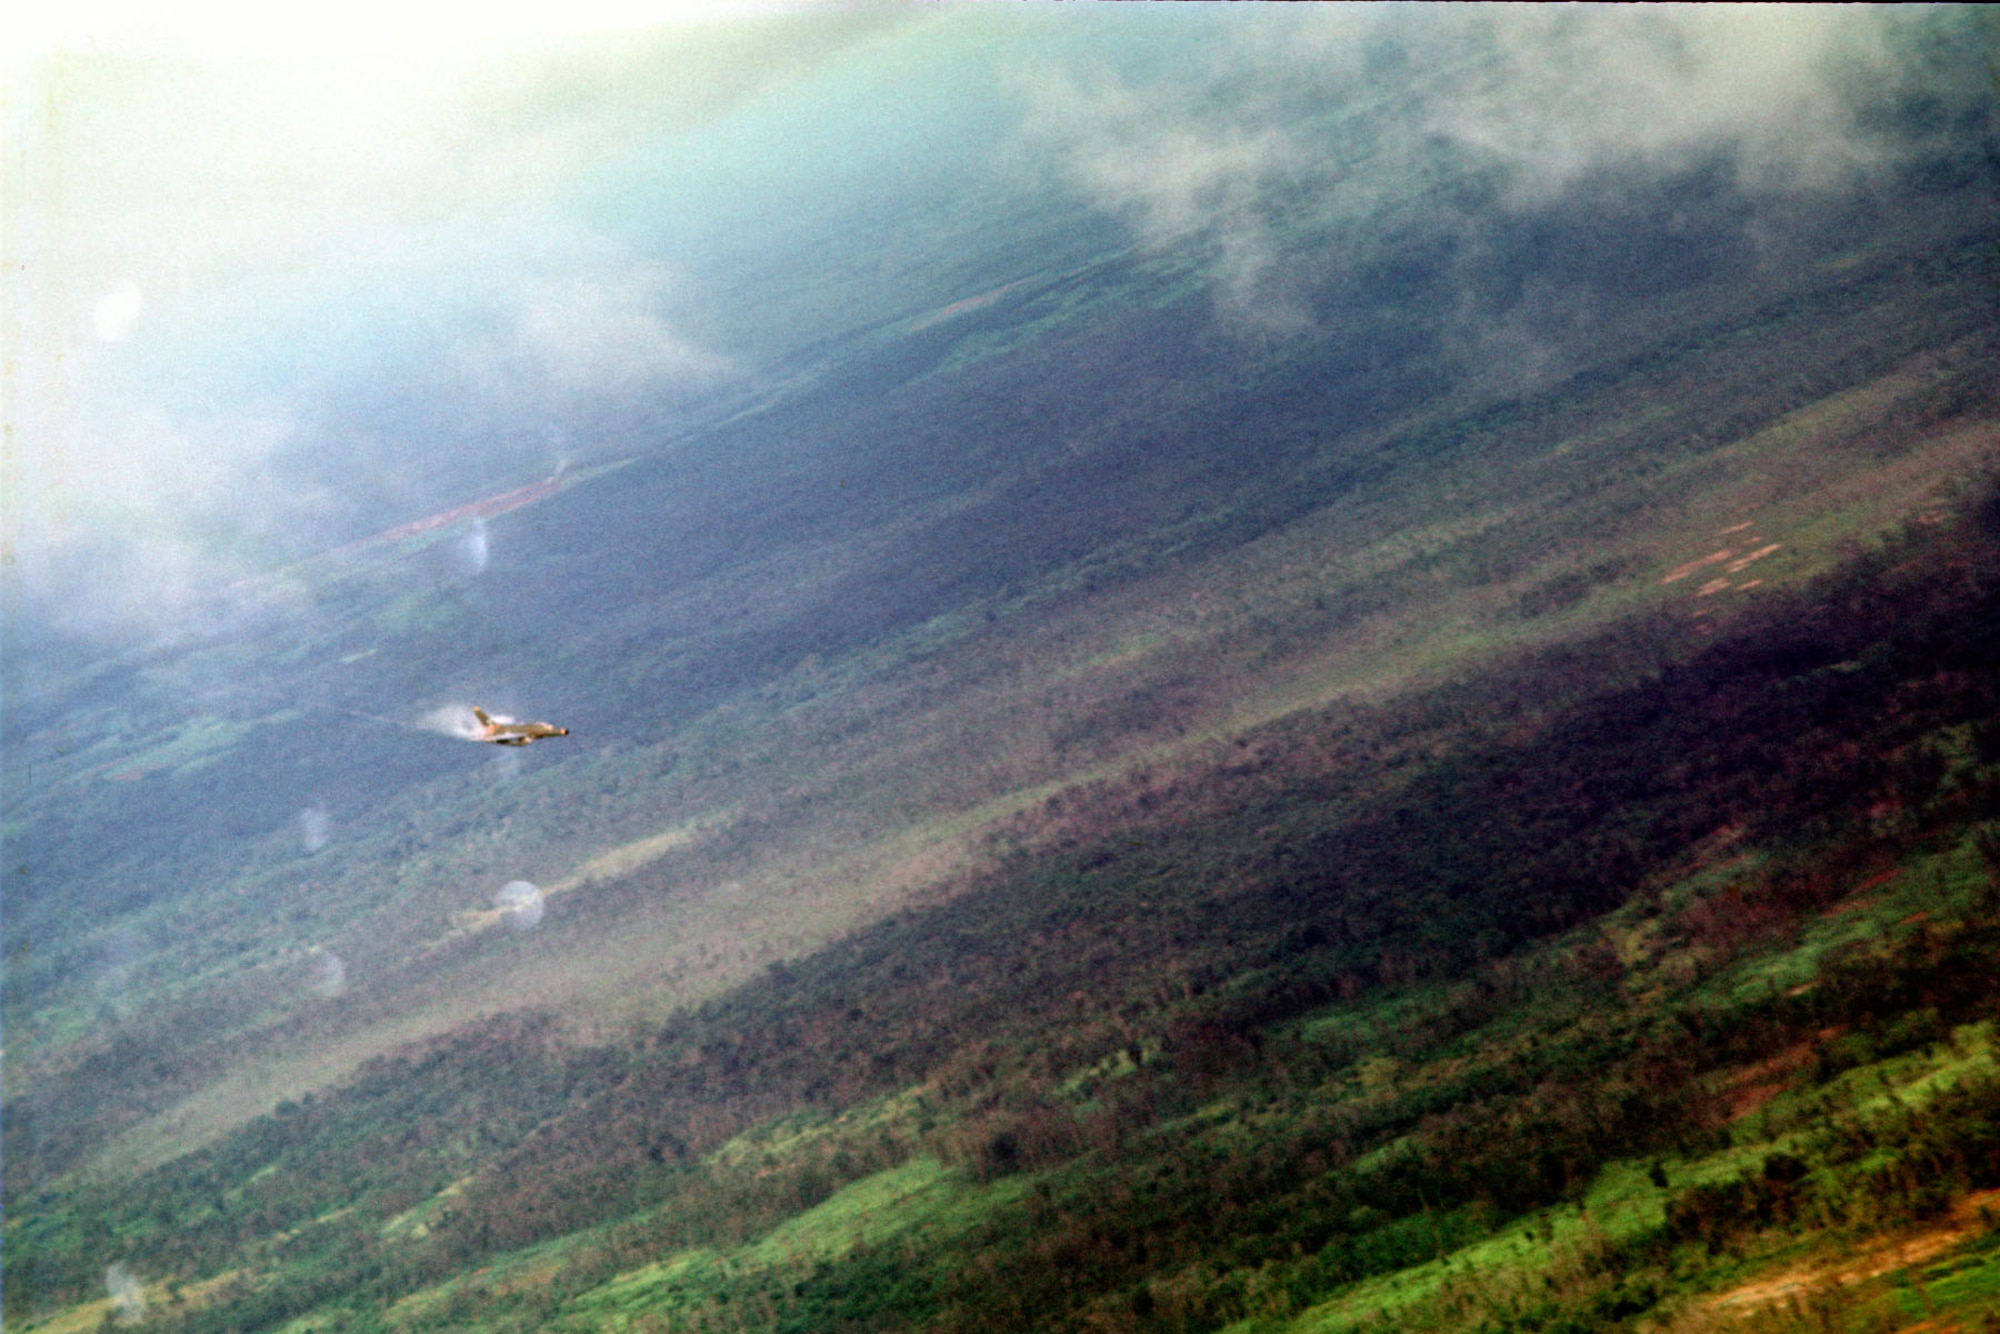 Strike aircraft could only attack after being “cleared hot” by the FAC. This F-100 from the 35th Tactical Fighter Wing, with the call sign Yellow Jacket 11 has been cleared hot to attack an enemy target in September 1969. (U.S. Air Force photo)